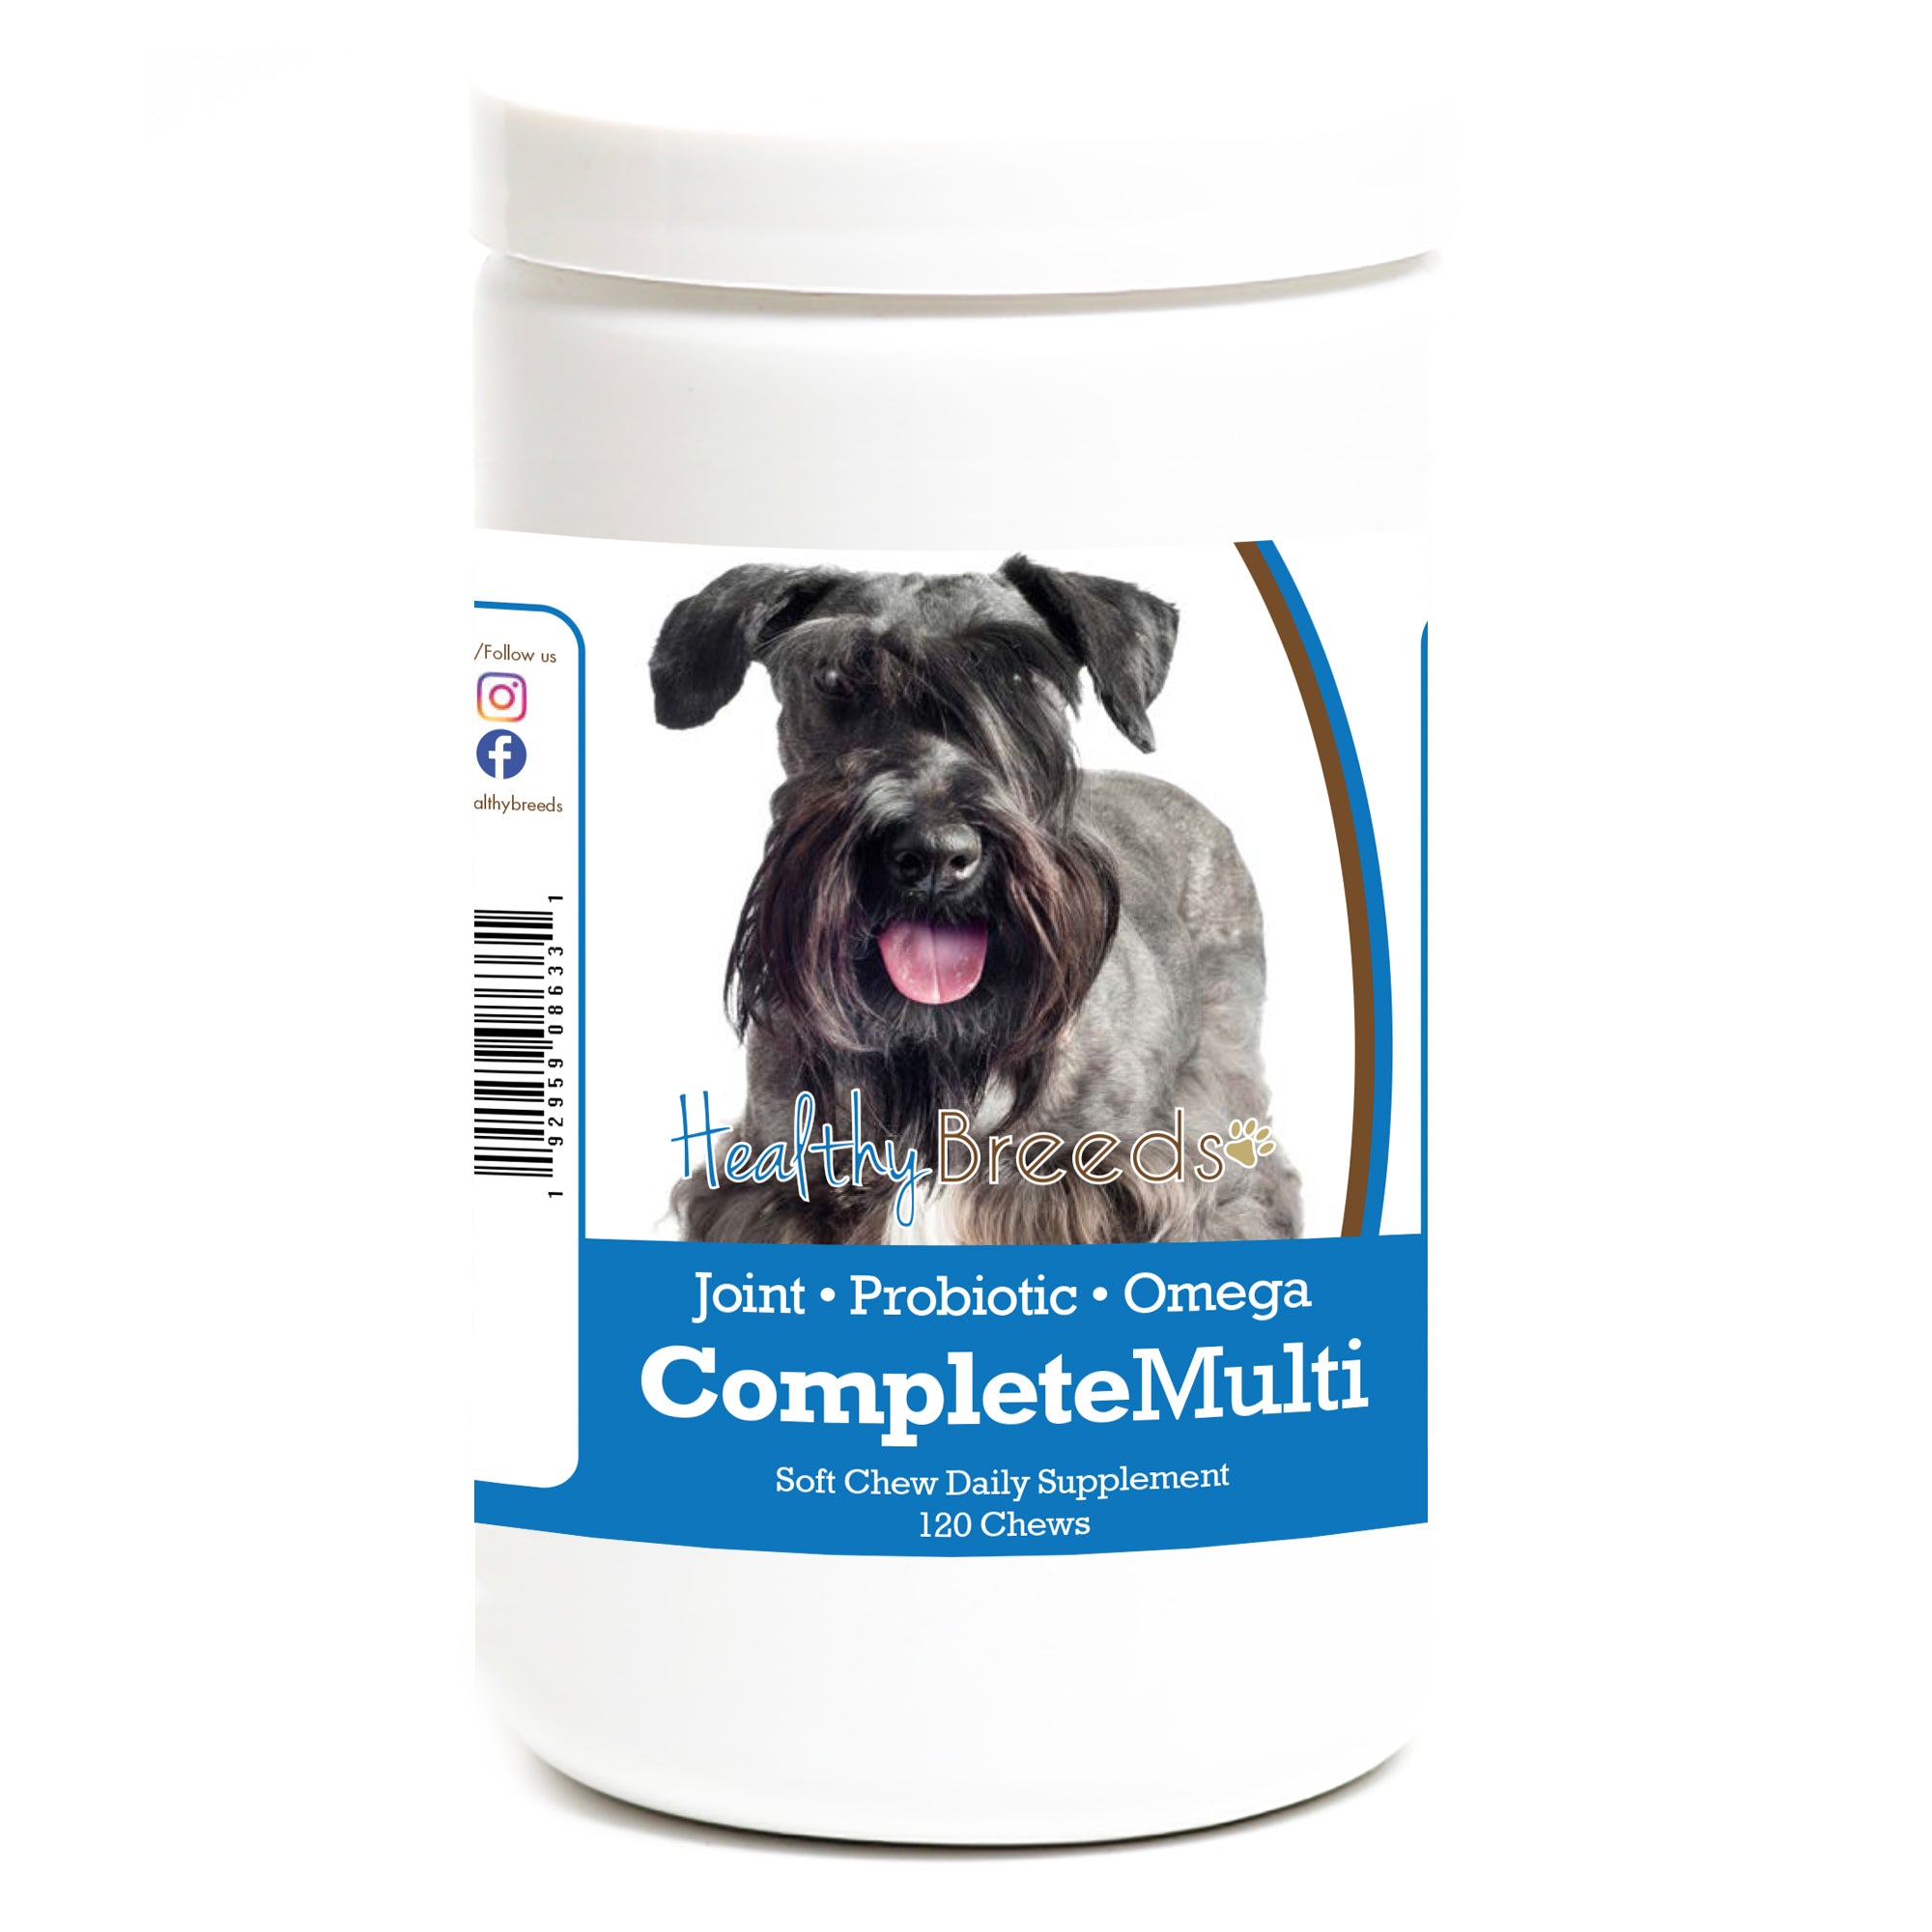 Cesky Terrier All In One Multivitamin Soft Chew 120 Count